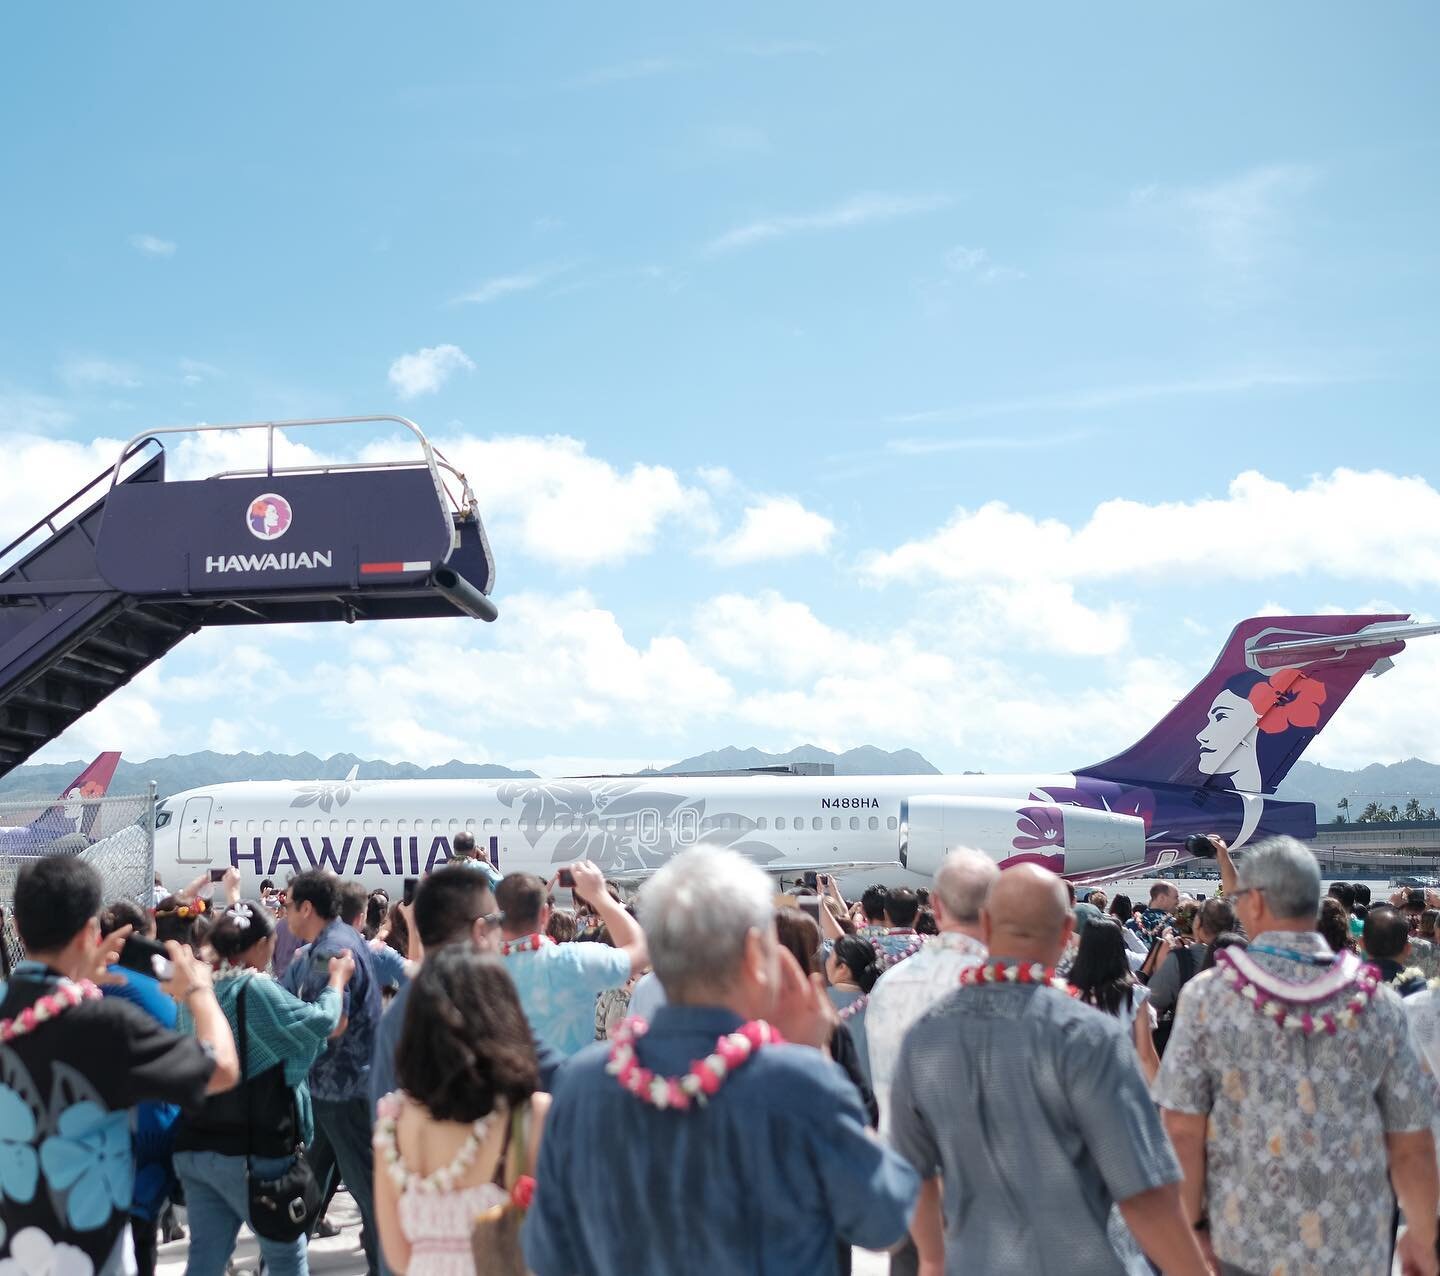 #flashback 2017 May/Lei Day with Hawaiian Airlines at their Pualani Reveal Celebration @hawaiianairlines